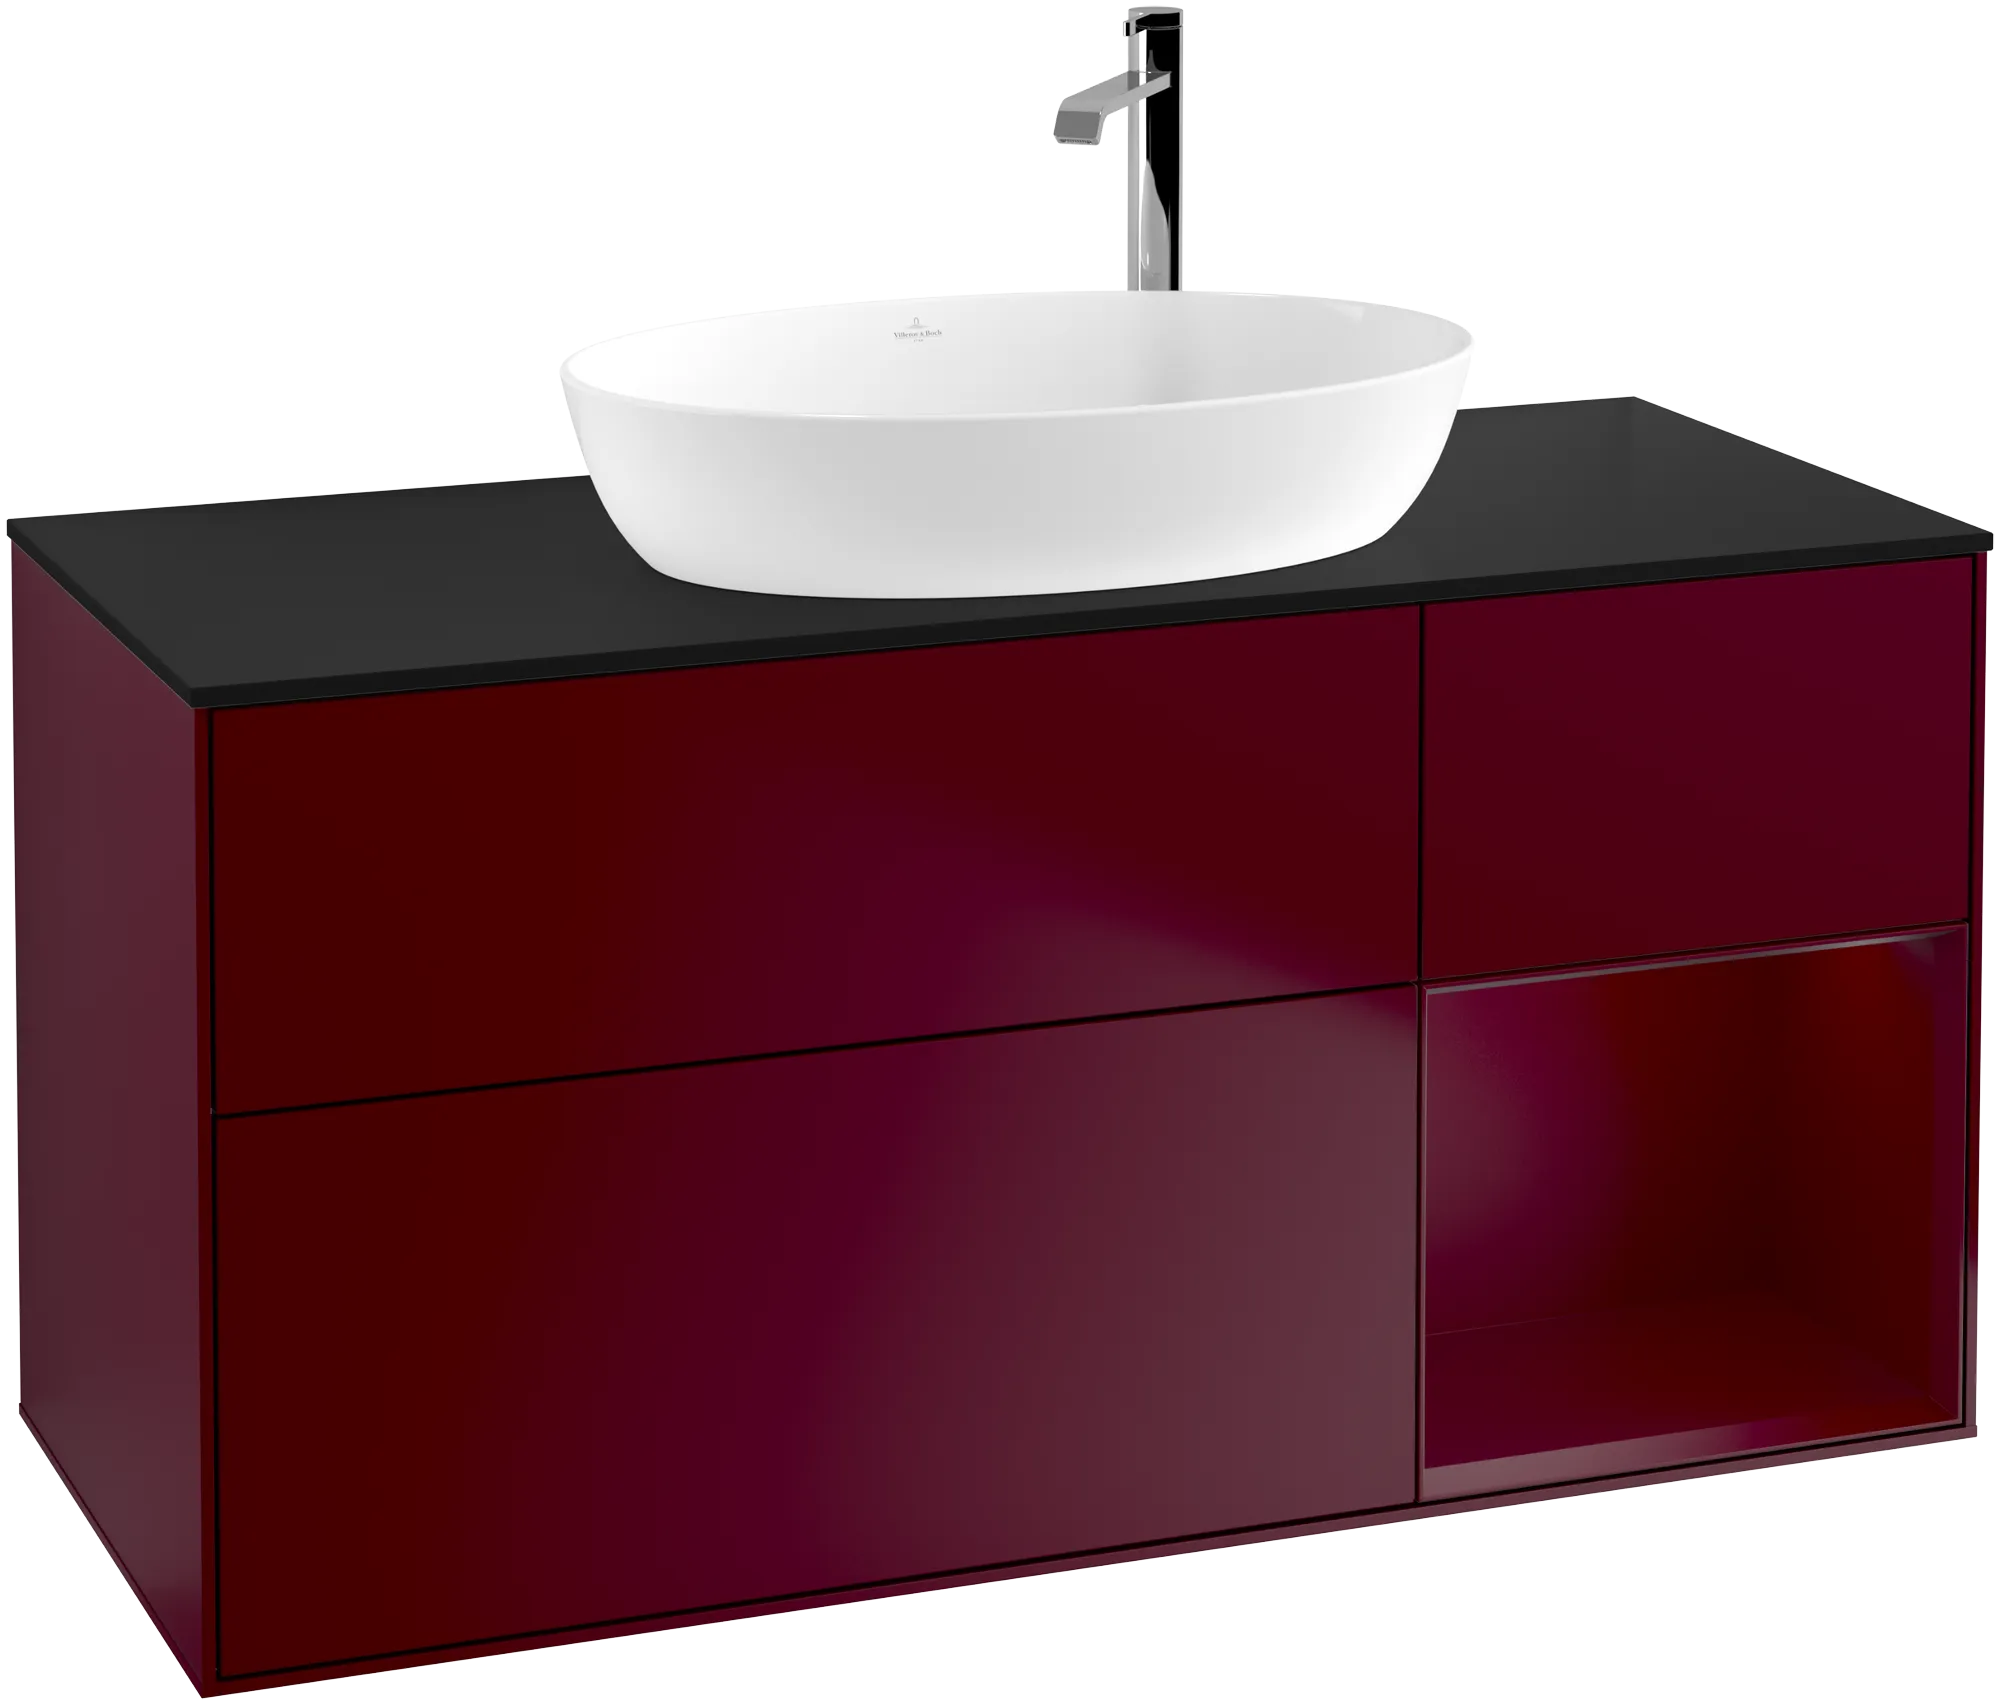 VILLEROY BOCH Finion Vanity unit, with lighting, 3 pull-out compartments, 1200 x 603 x 501 mm, Peony Matt Lacquer / Peony Matt Lacquer / Glass Black Matt #G952HBHB resmi